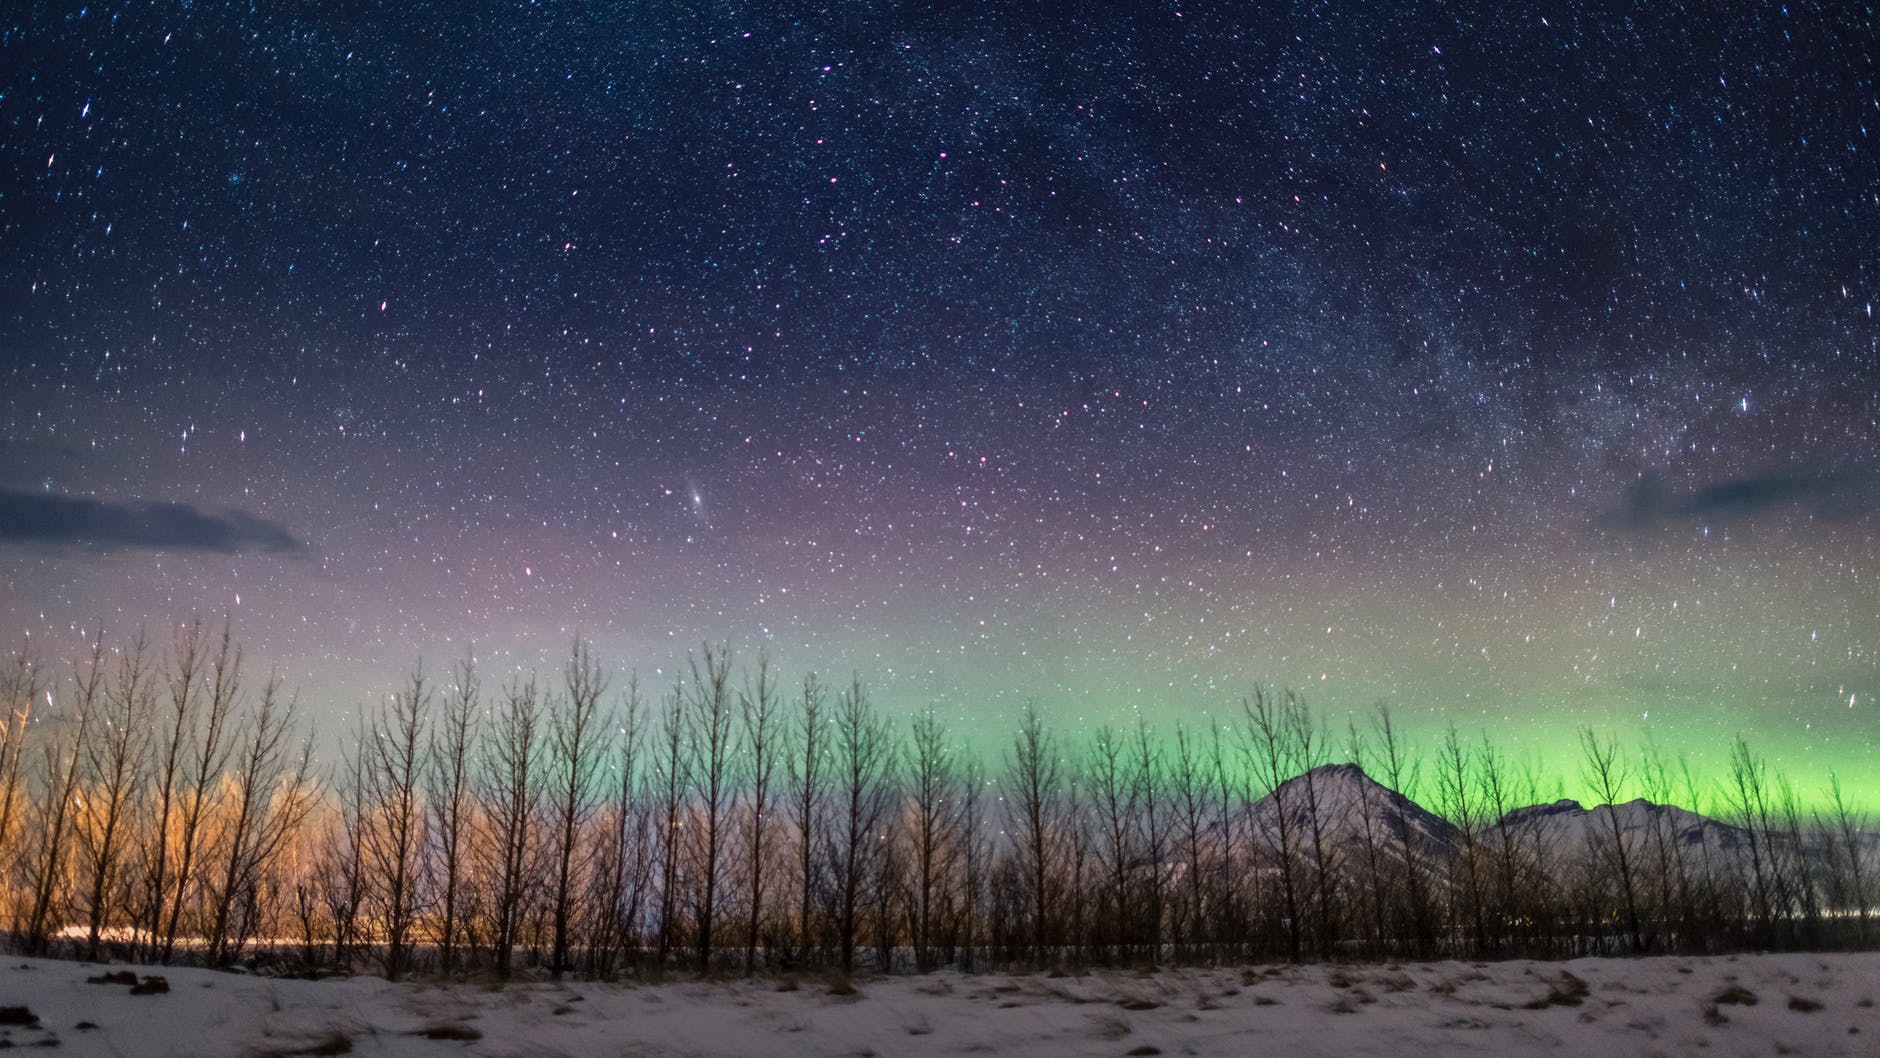 Iceland in November - Catch a Glimpse of the Northern lights